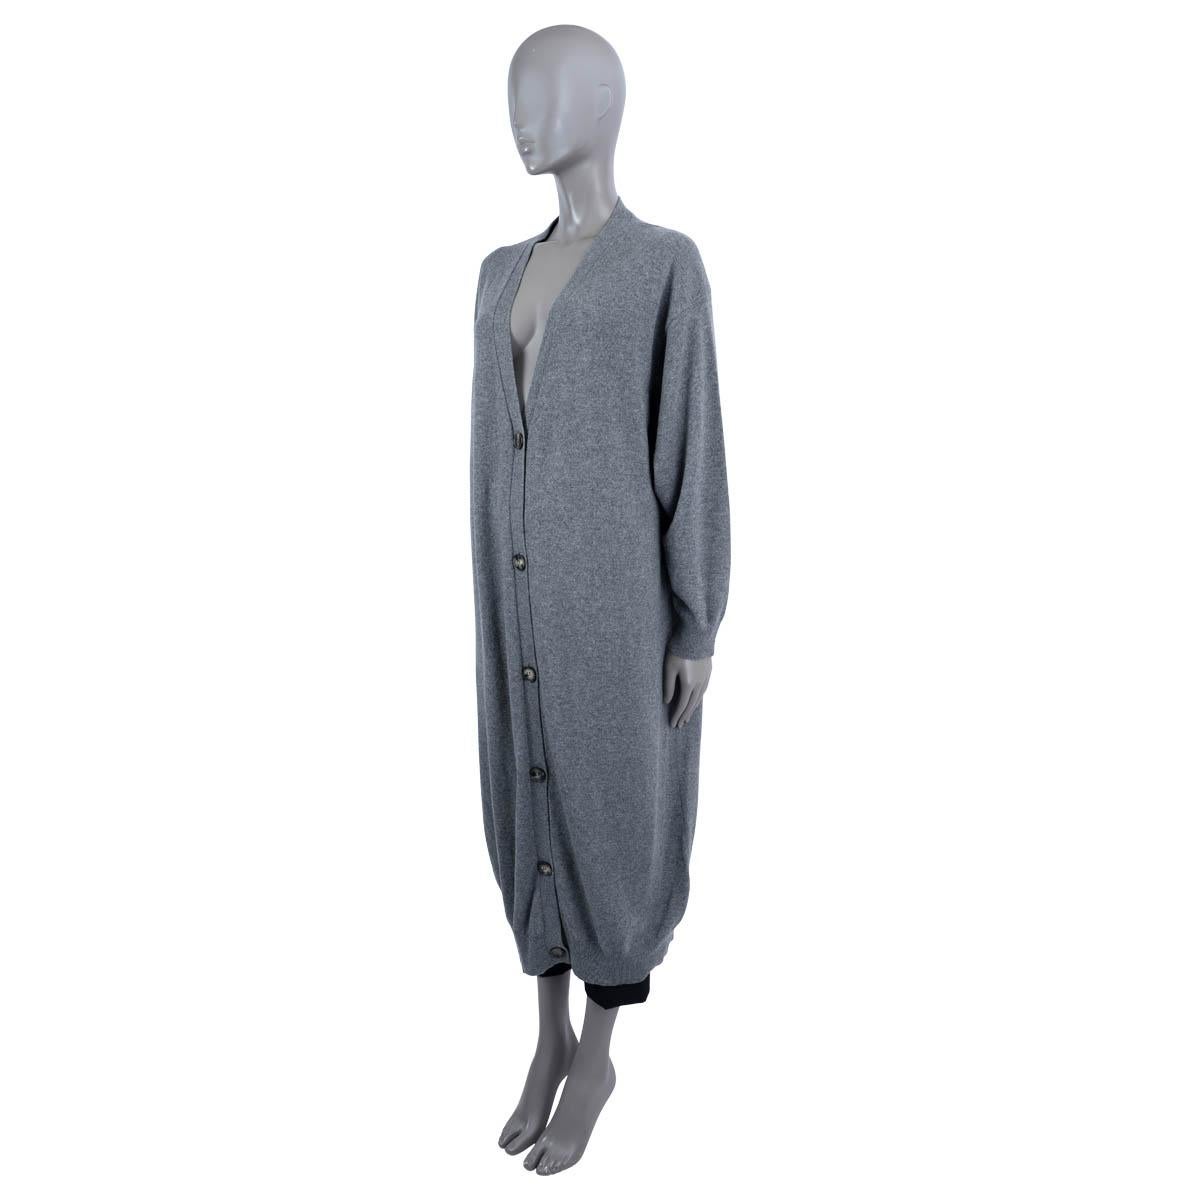 100% authentic The Row long-line knit cardigan in grey cashmere (100%). The design features six front buttons, a deep v-neck and rib-knit trim. Has been worn and is in excellent condition. 

Measurements
Tag Size	M
Size	M
Shoulder Width	60cm